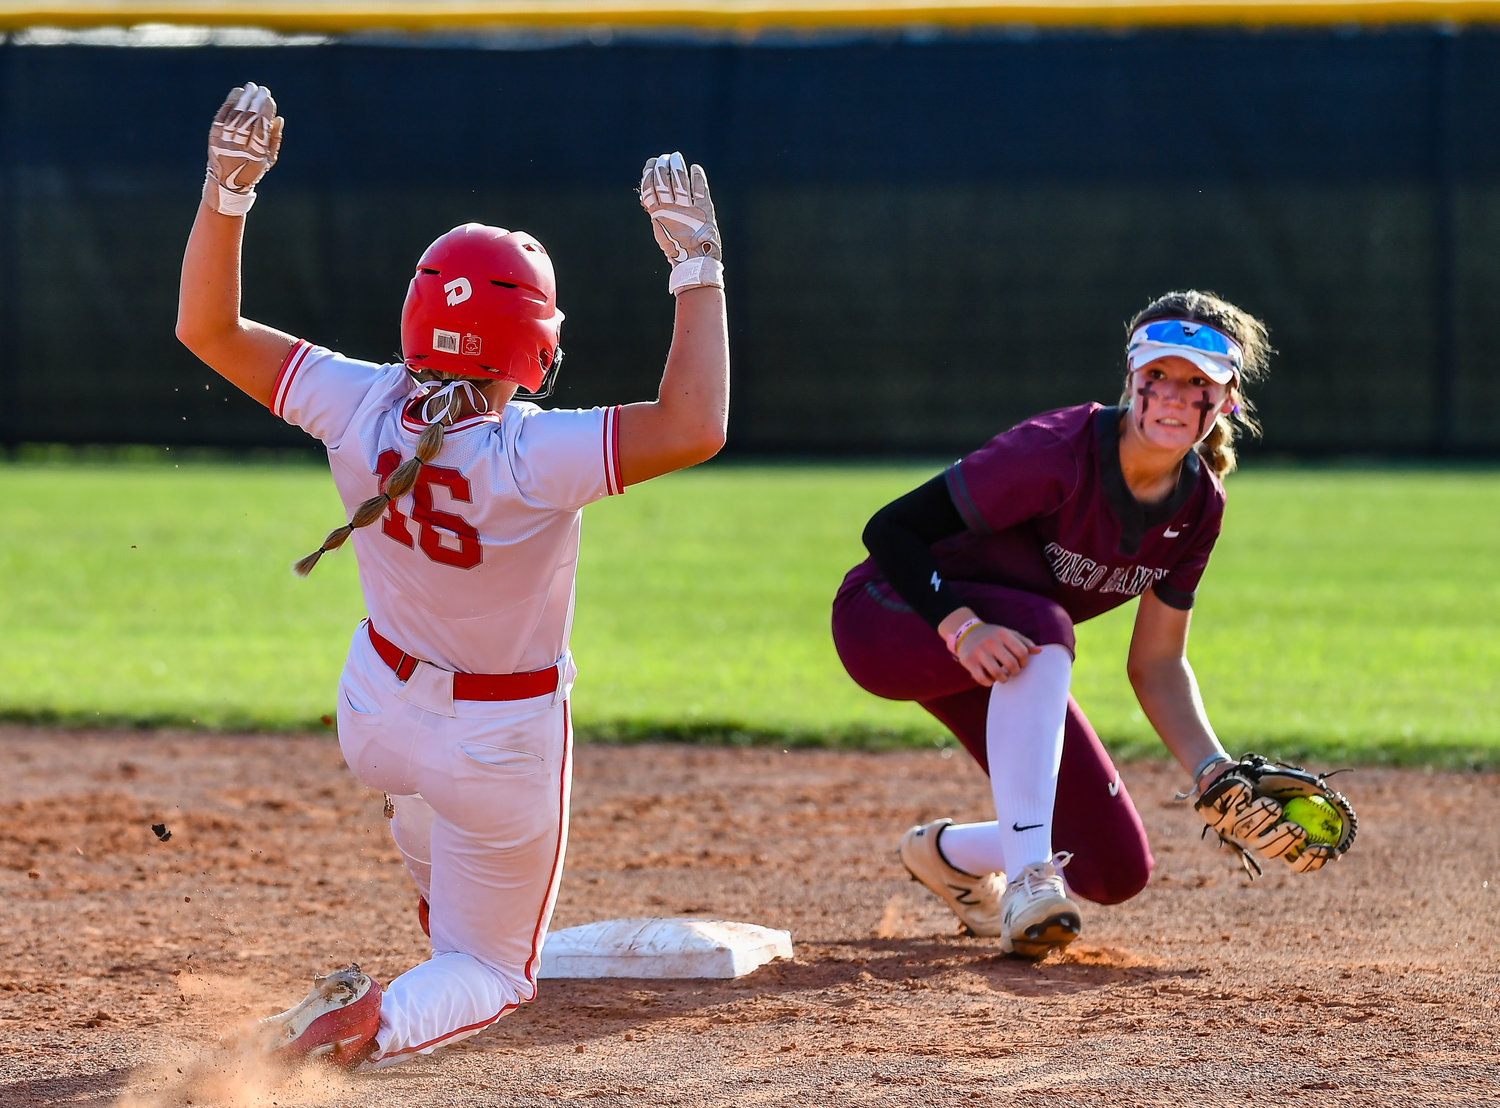 May 13, 2022: Katy's Hailey Gore #16 slides safely into second base during the second inning of the Regional Quarterfinal playoff between Katy and Cinco Ranch at Katy HS. (Photo by Mark Goodman / Katy Times)